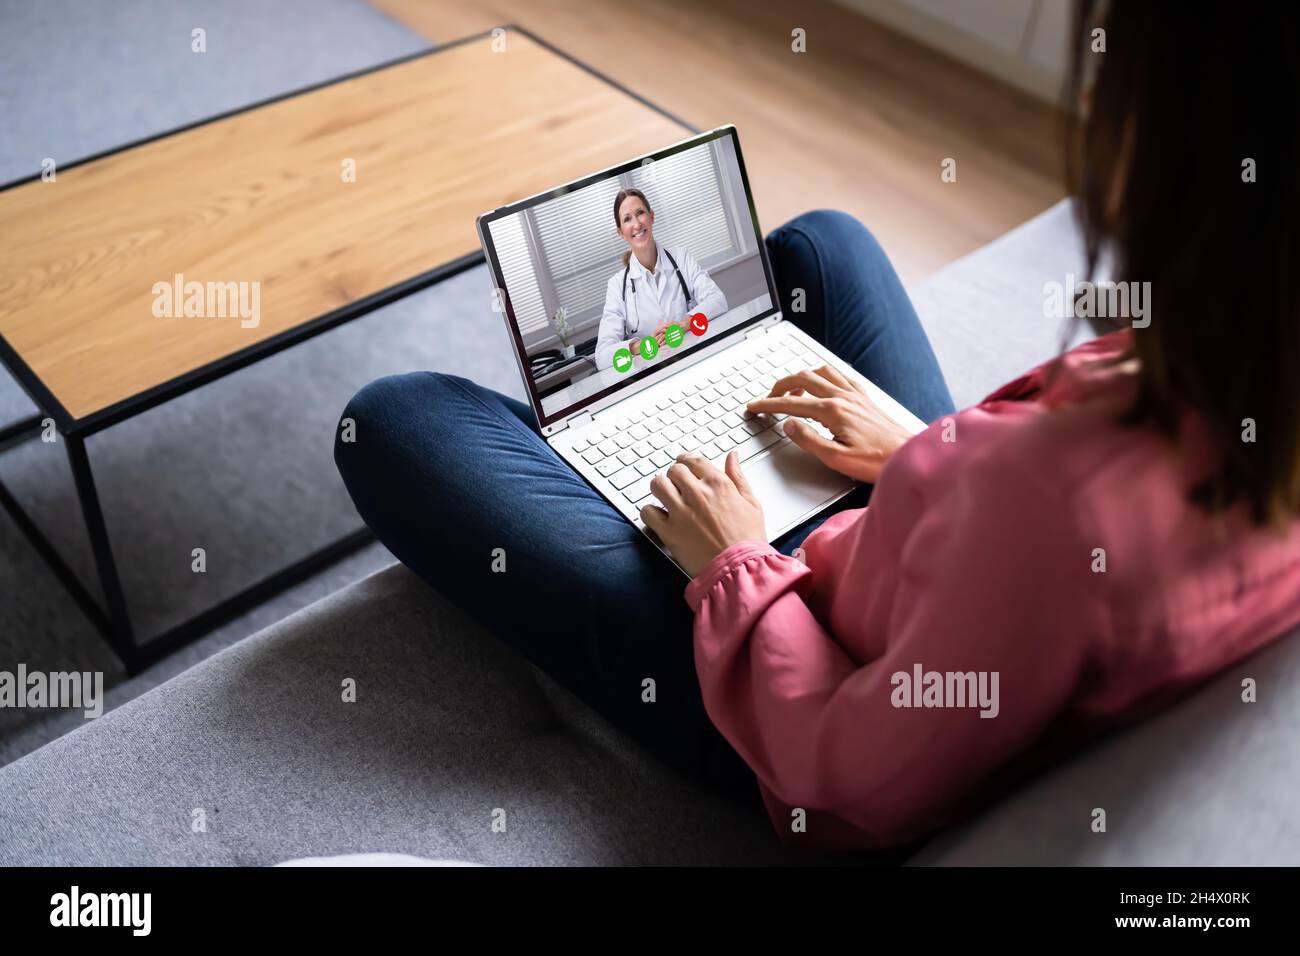 Video Conference Doctor Telemedicine Consult Call Or Webinar Stock Photo